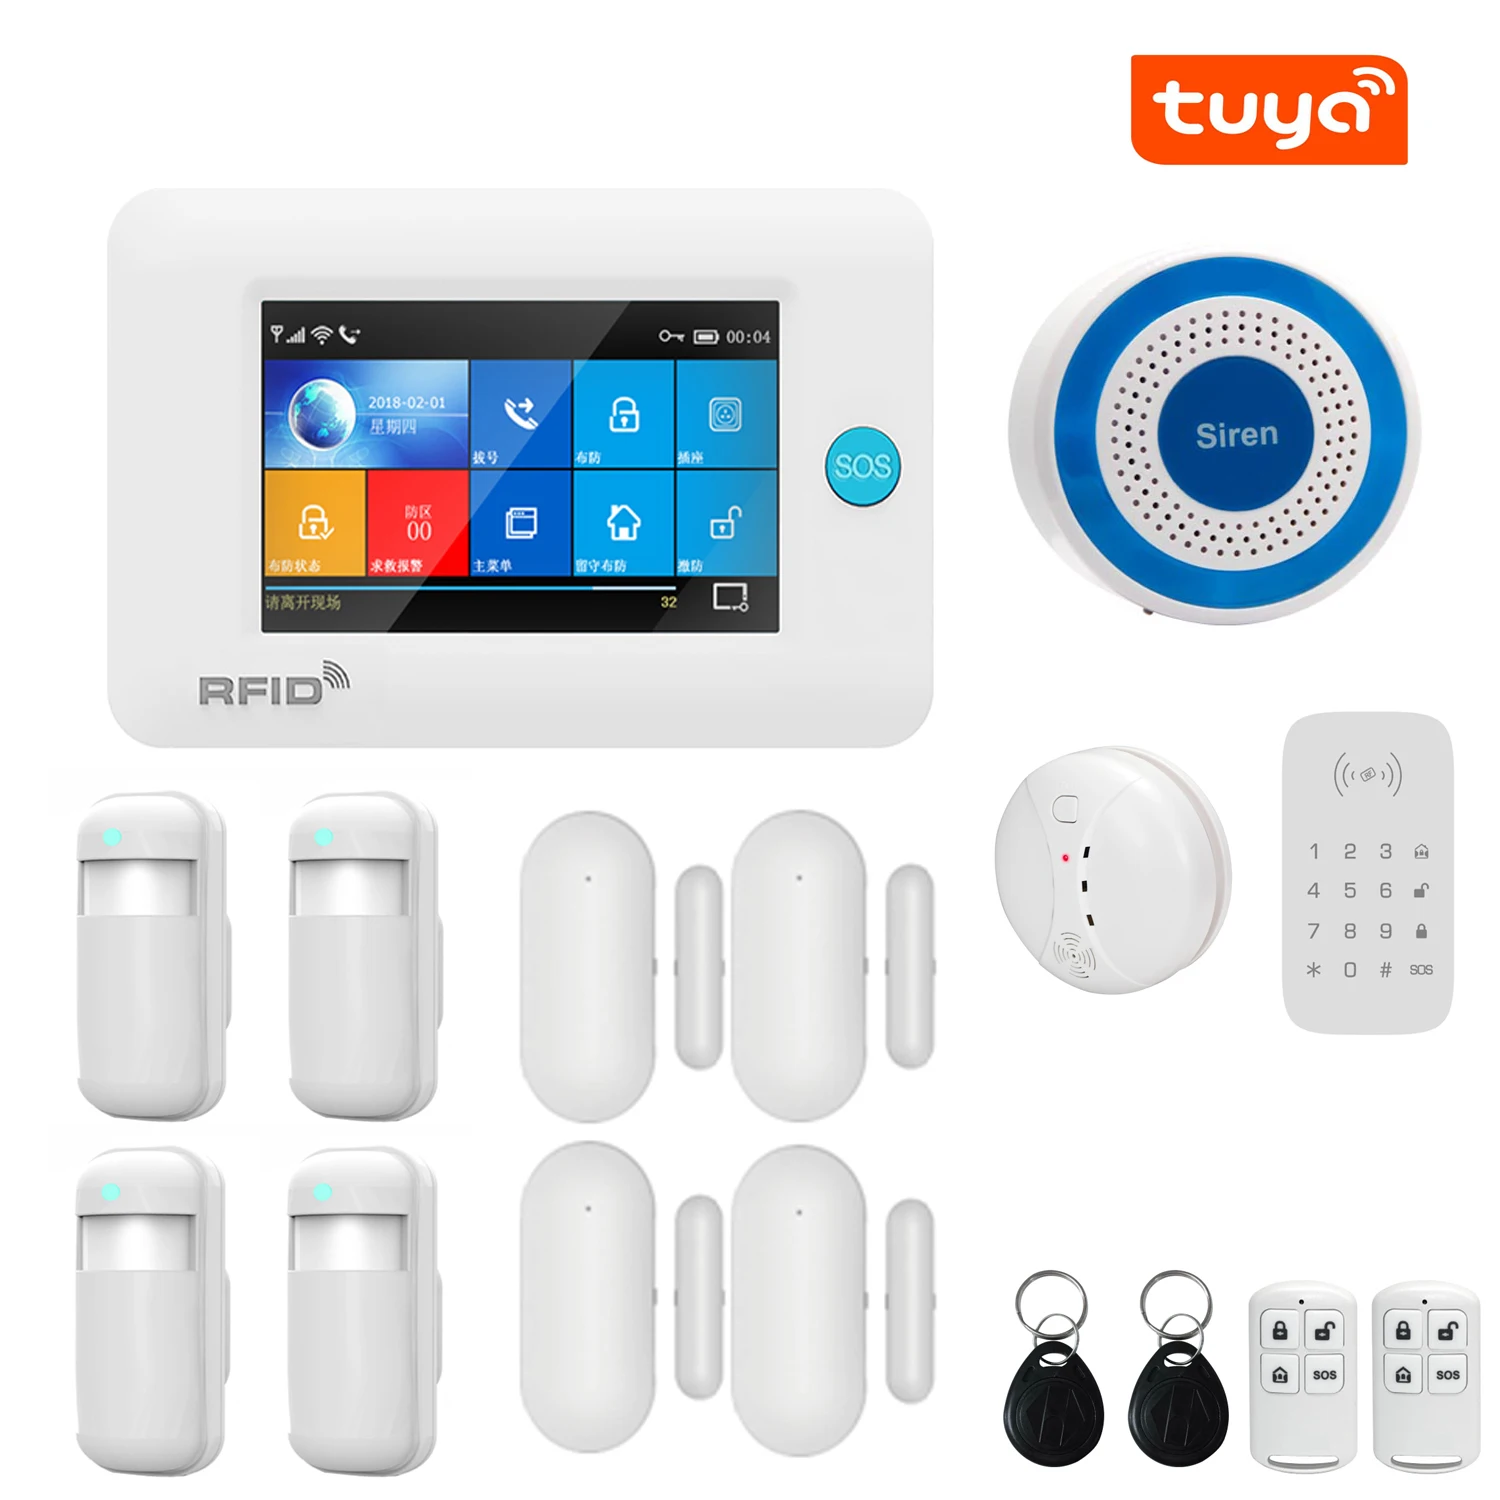 Full Touch Wireless Security Screen 2G GSM WiFi Smart Home Burglar Alarm System 